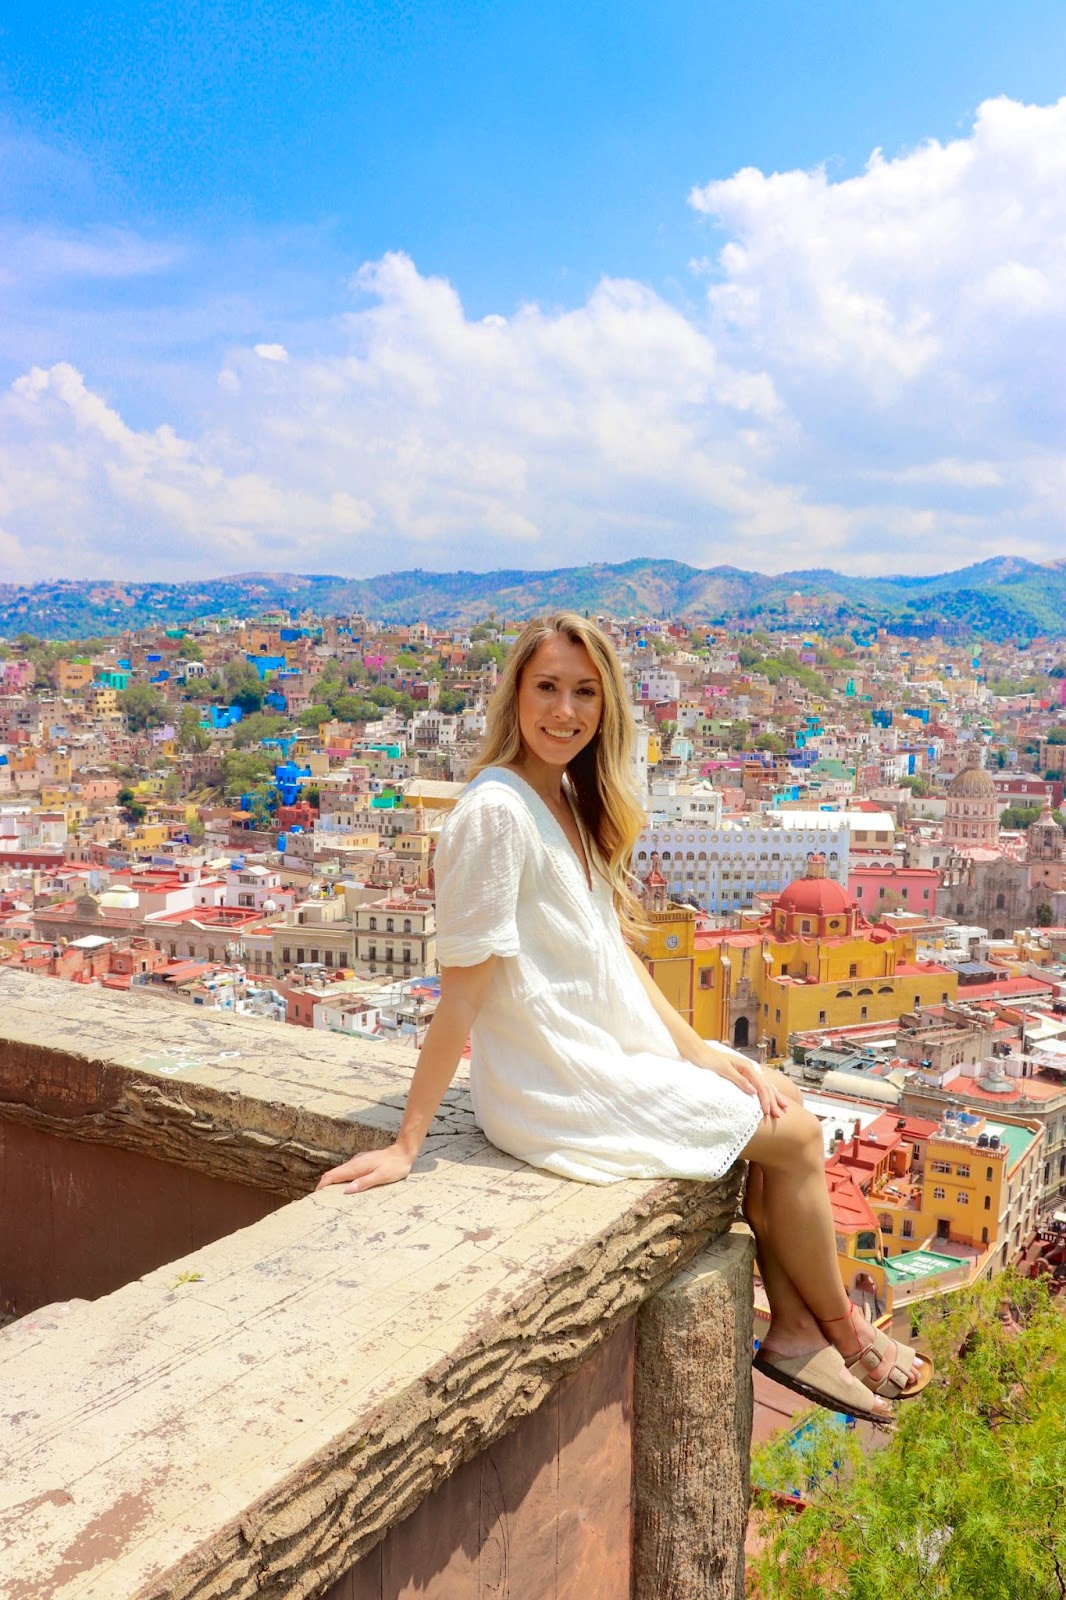 Enjoy the view in Guanajuato, one of the best places for digital nomads in Mexico.